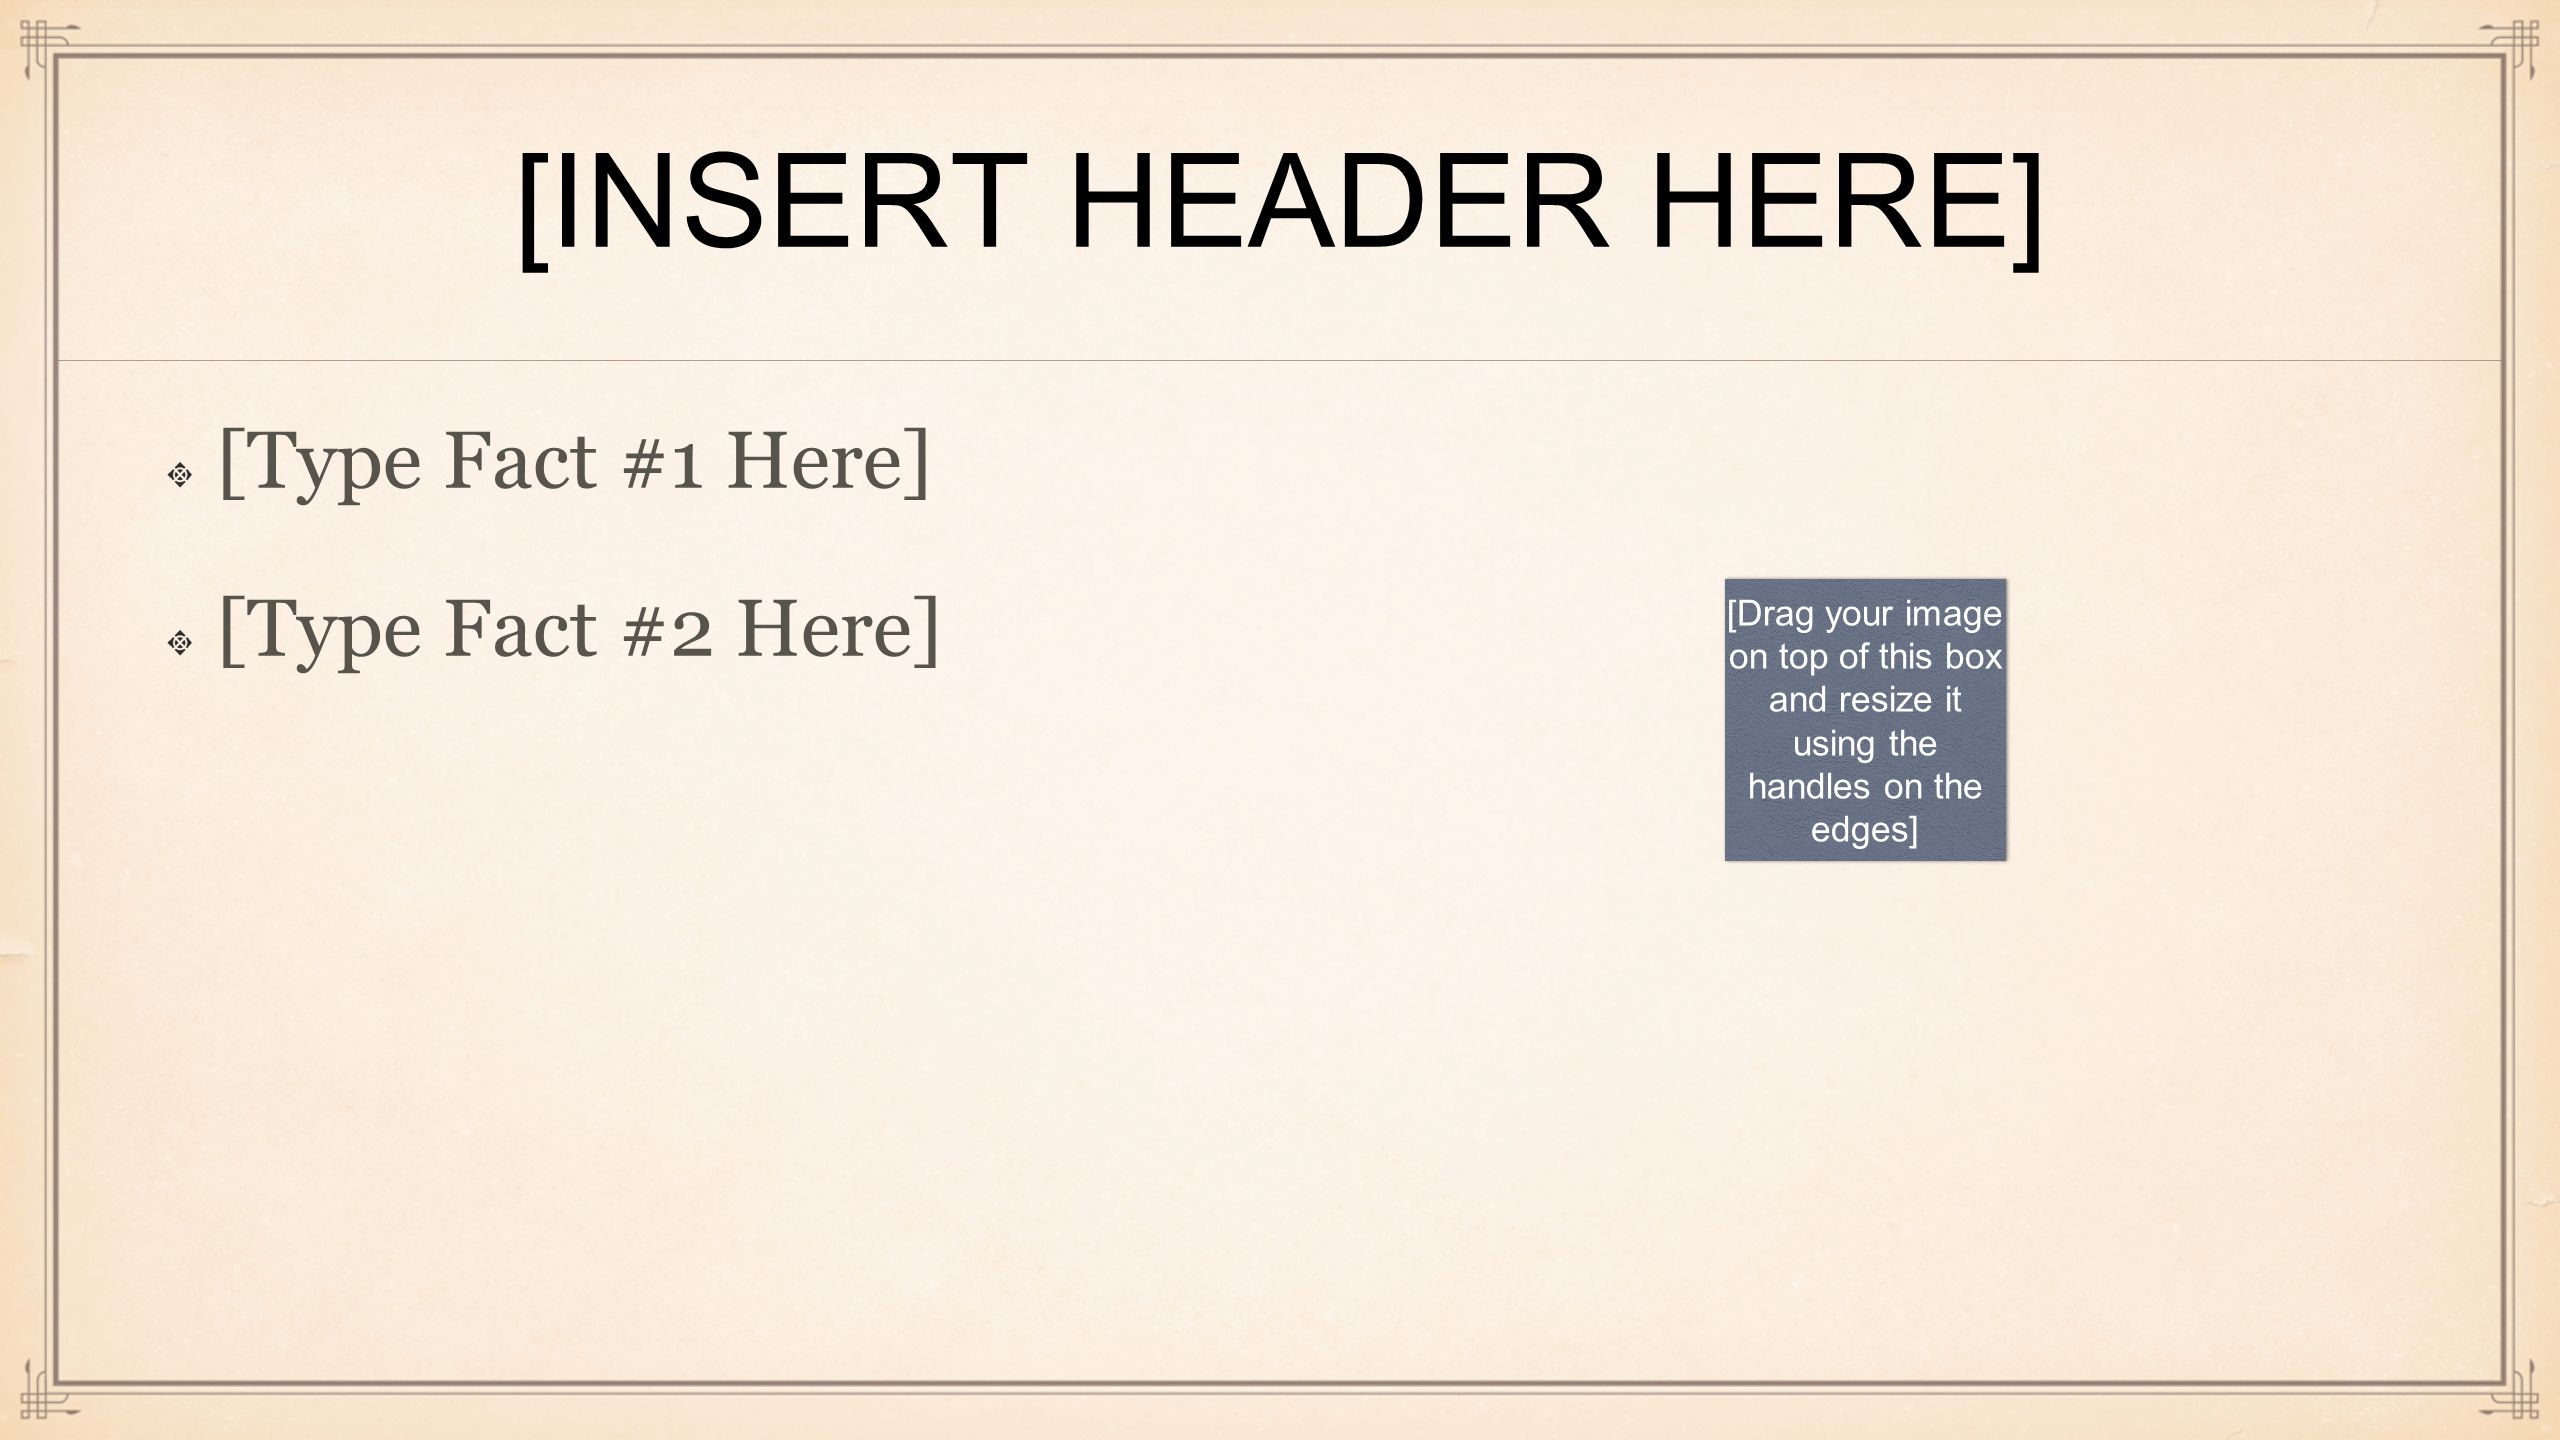 [INSERT HEADER HERE] [Type Fact #1 Here] [Type Fact #2 Here] [Drag your image on top of this box and resize it using the handles on the edges]